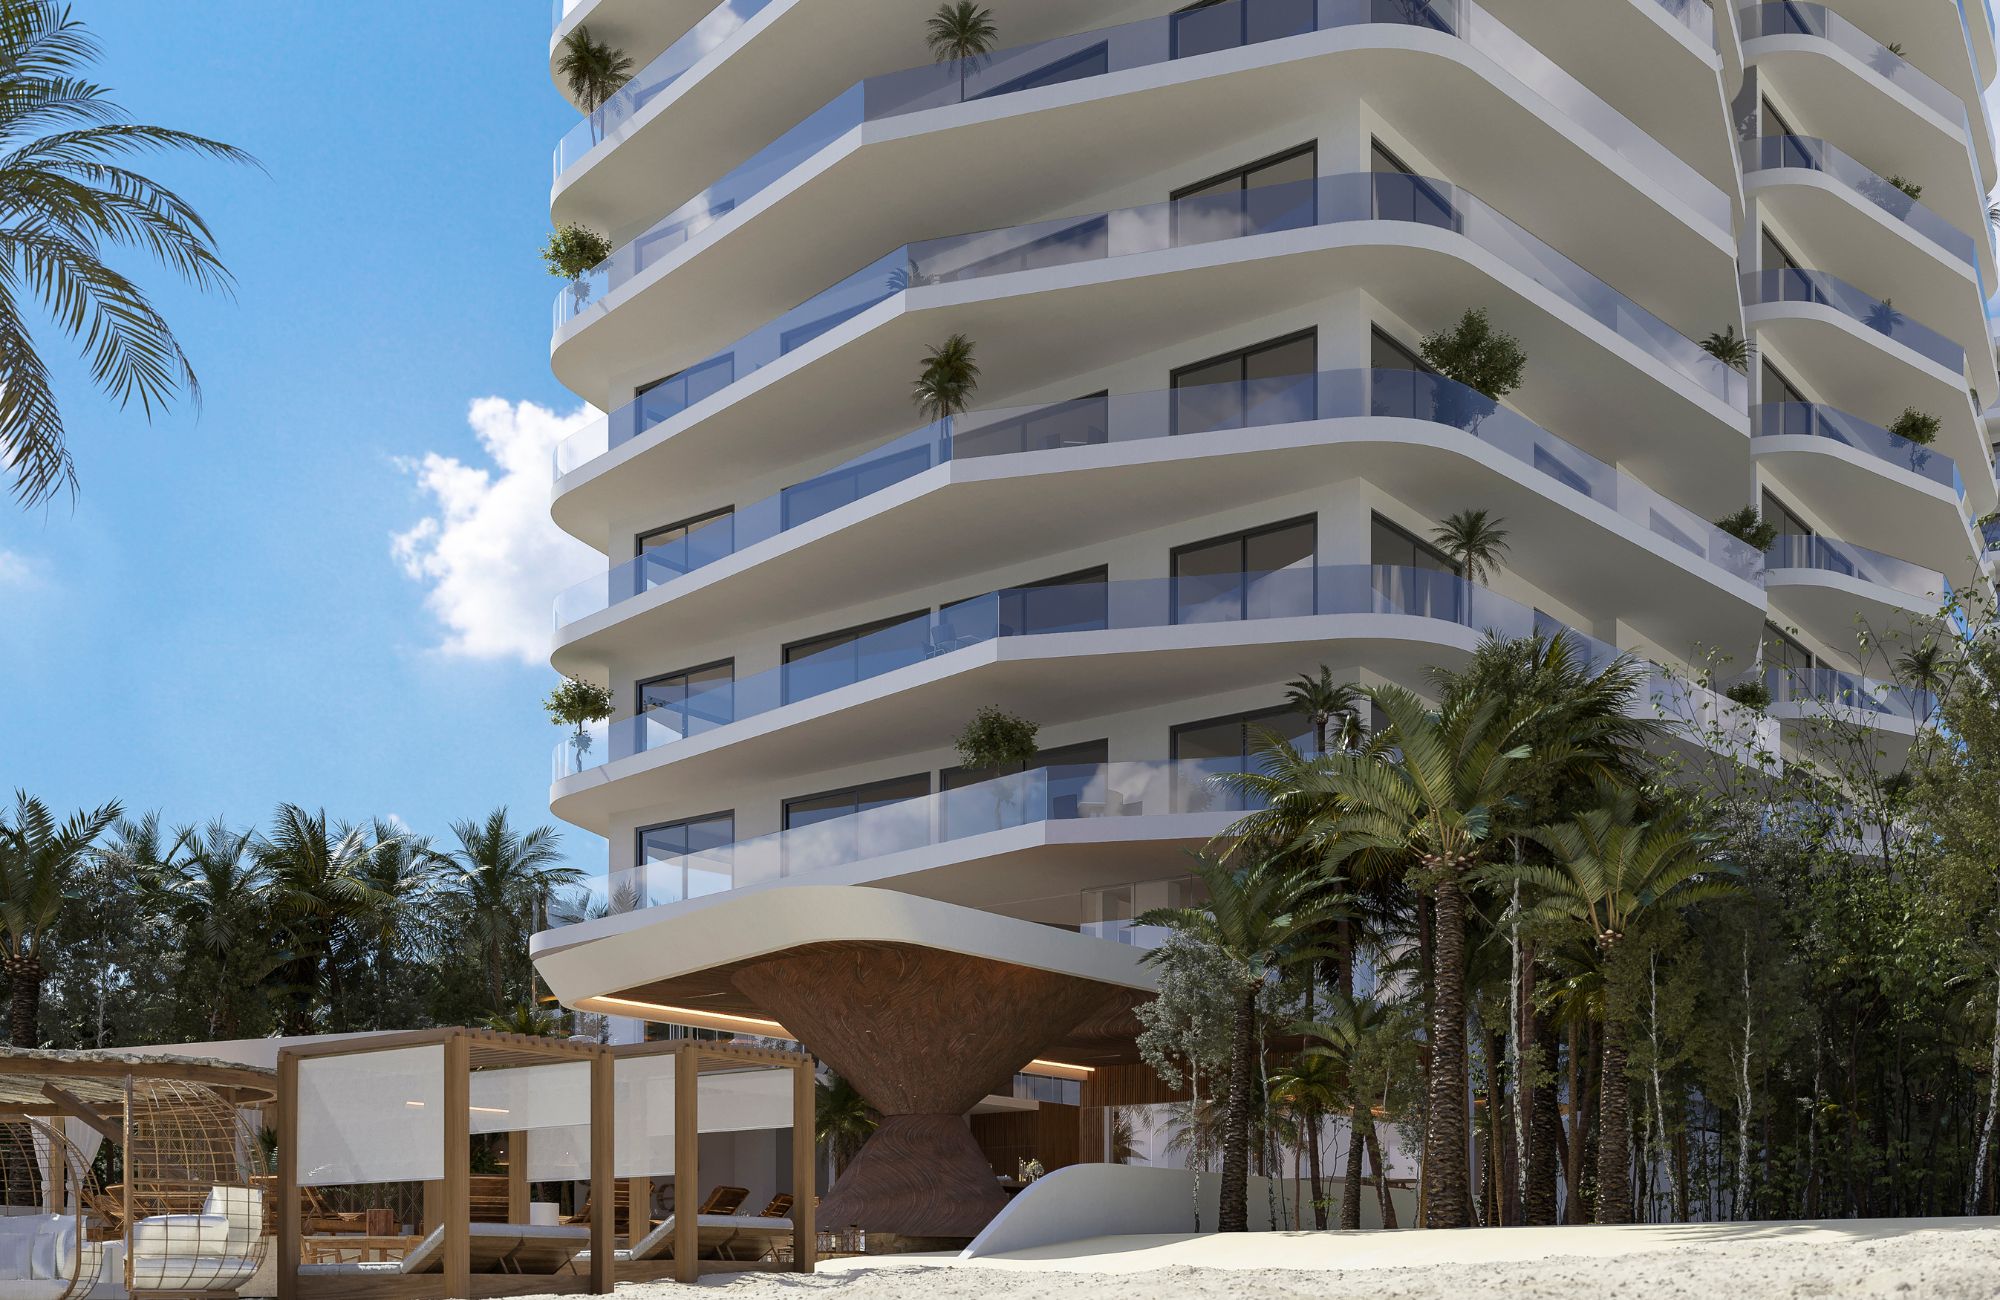 Condominium with children&amp;#39;s games, children&amp;#39;s party room, swimming pool, pre-construction, Colosio Boulevard for sale, Cancún.